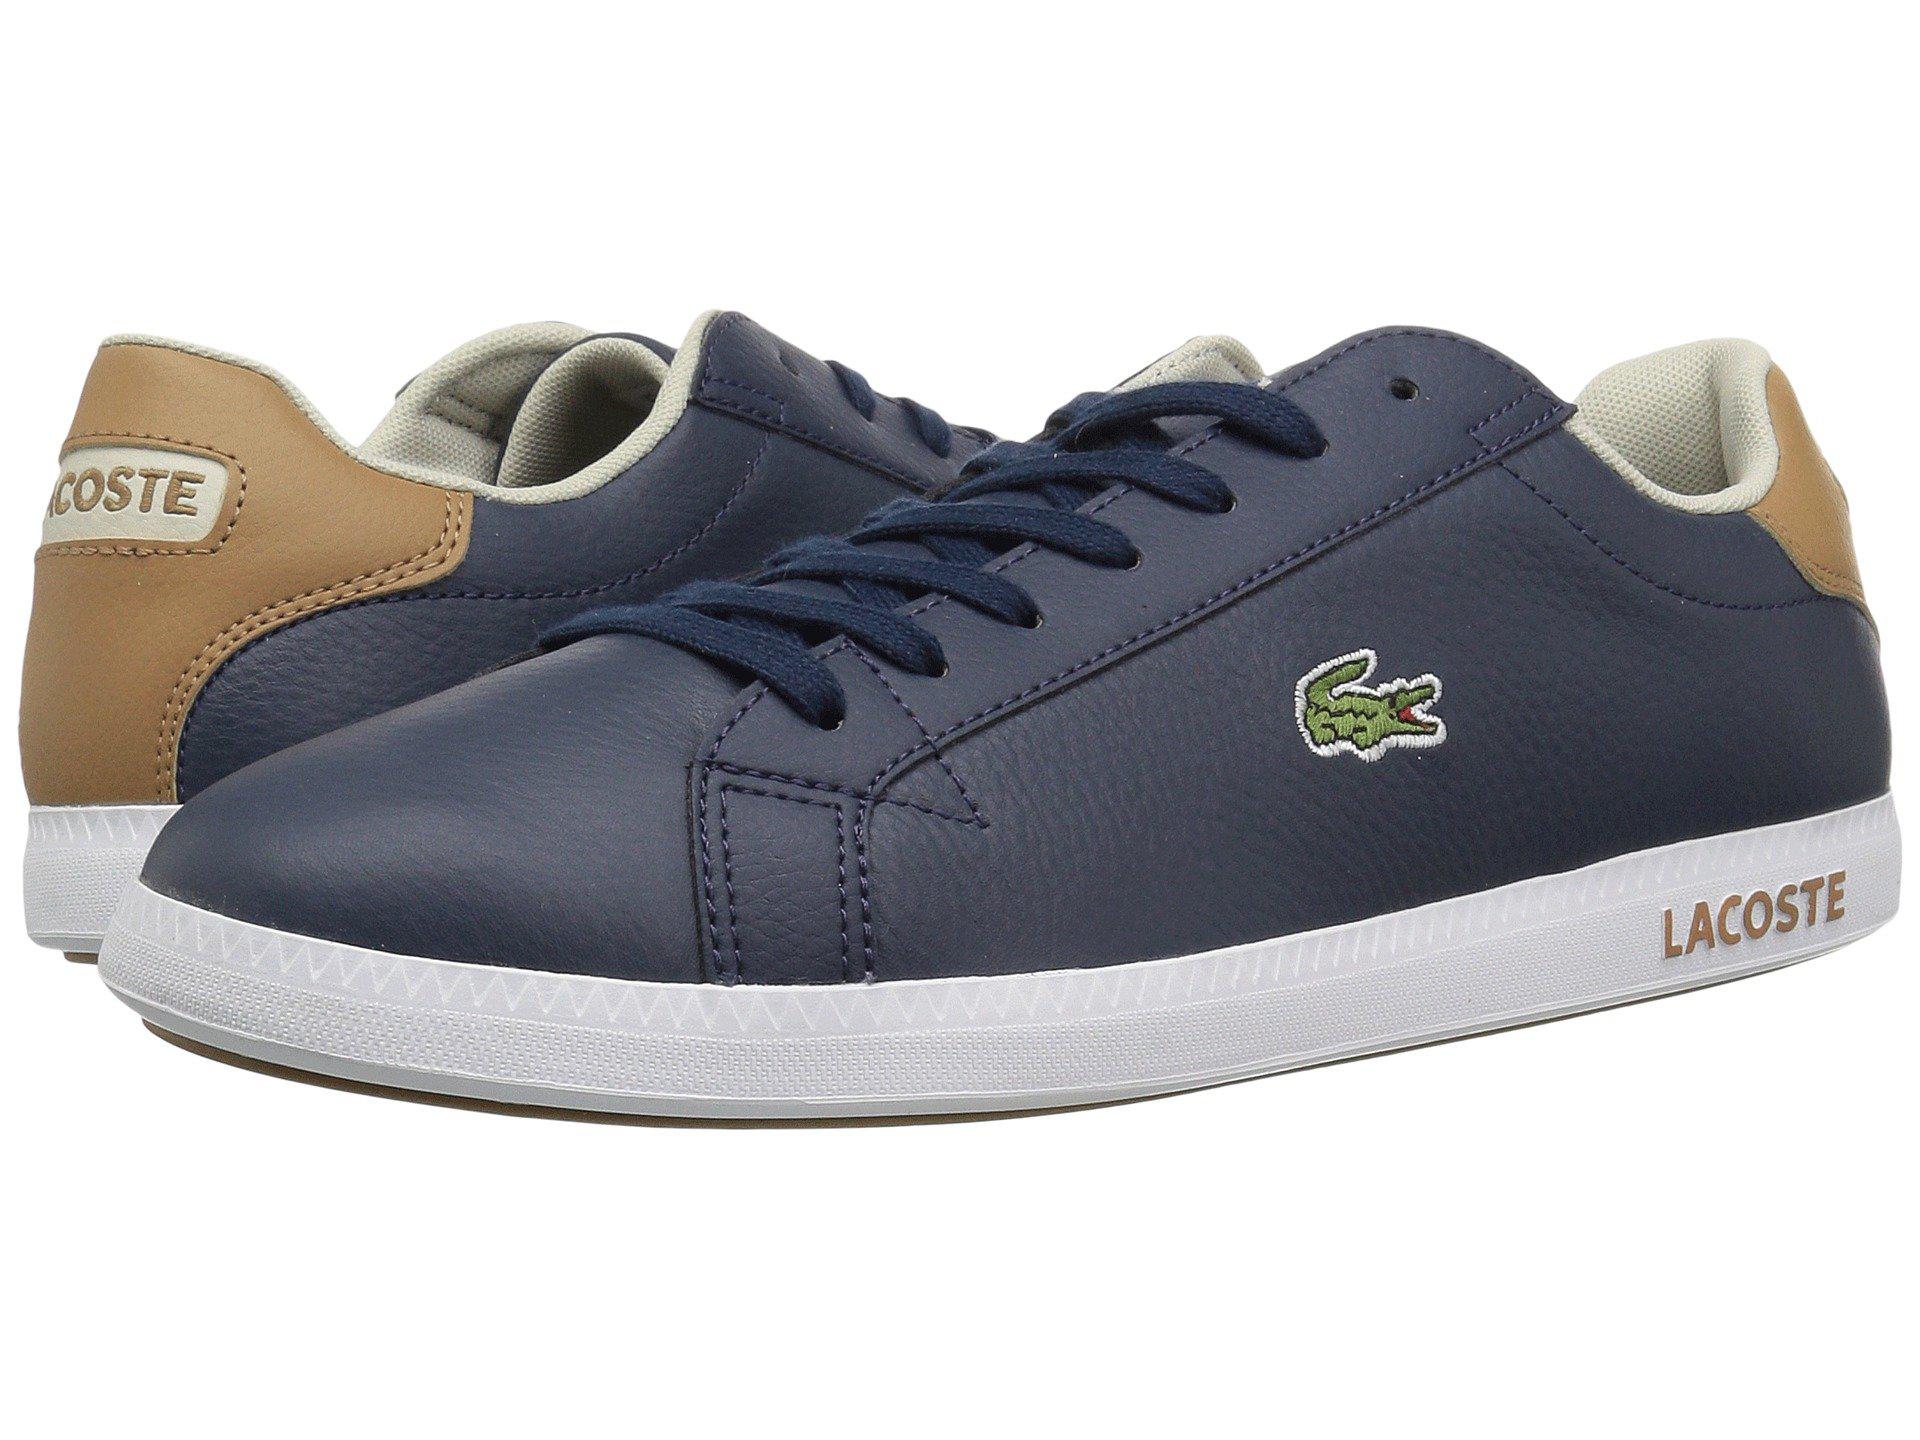 Lacoste Leather Graduate Lcr3 118 1 in 